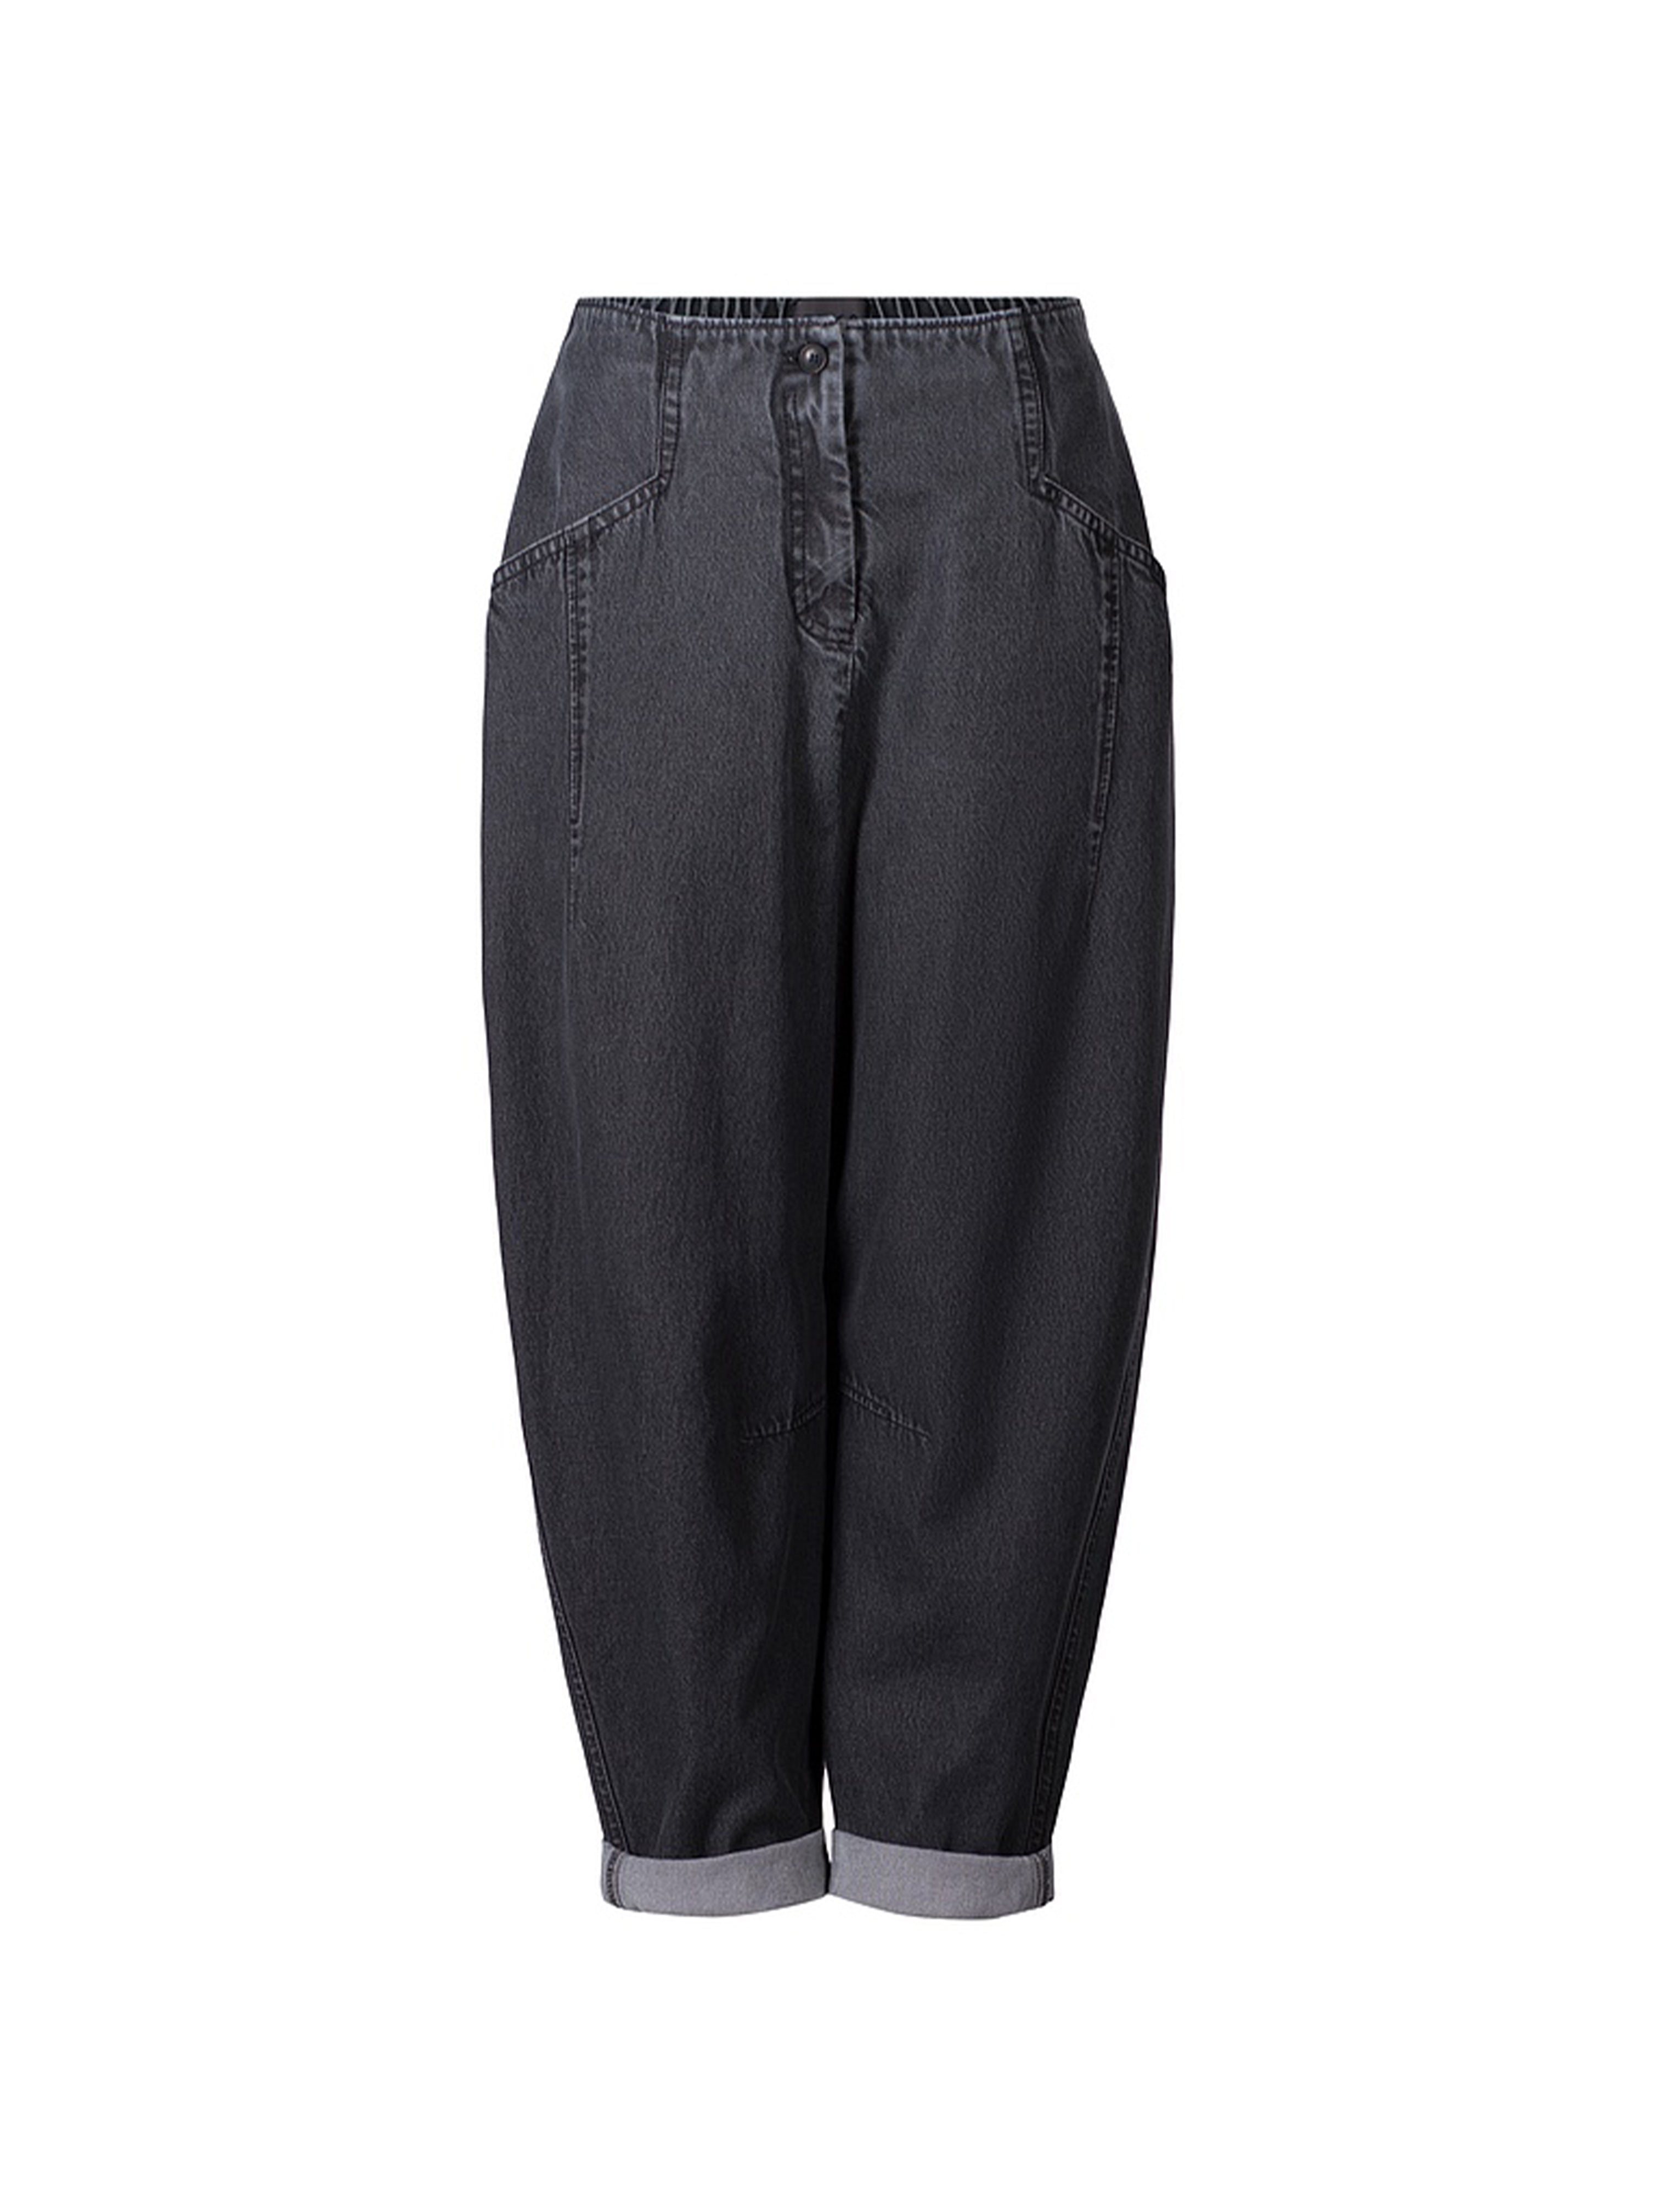 YESSO PANT BLACK WASH